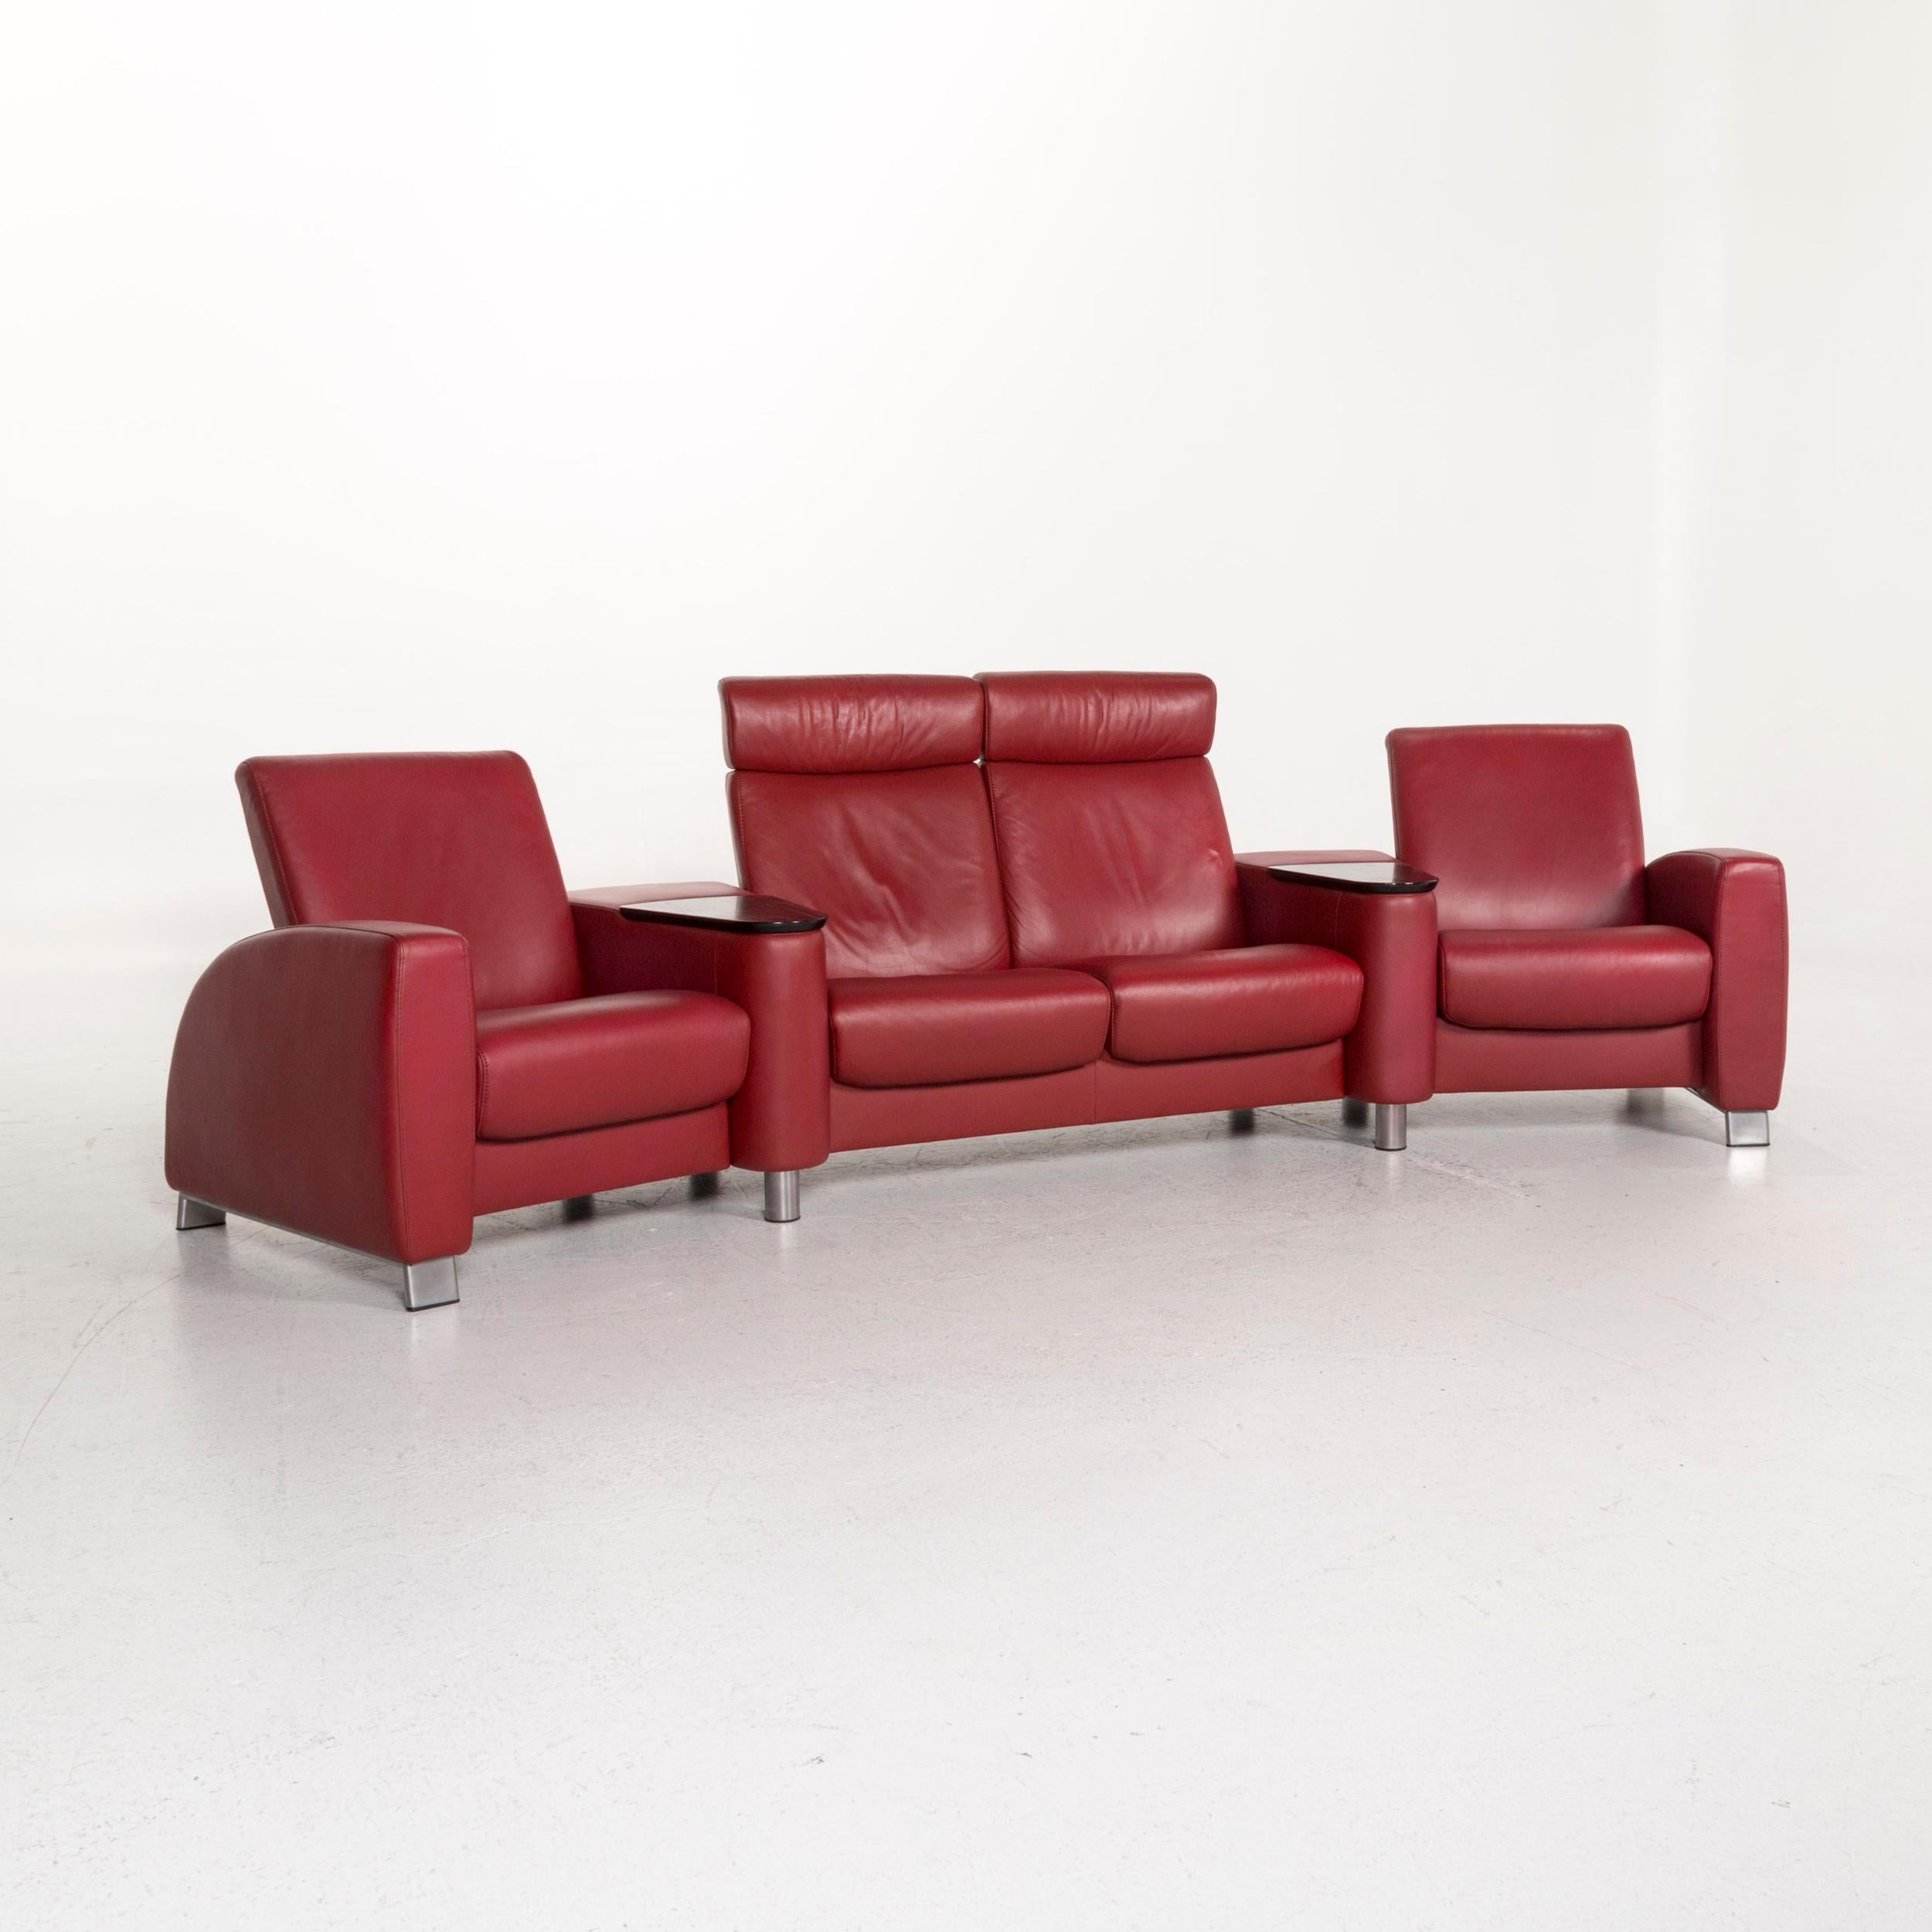 Stressless Arion Leather Sofa Red Four-Seat Function Home Theater 2